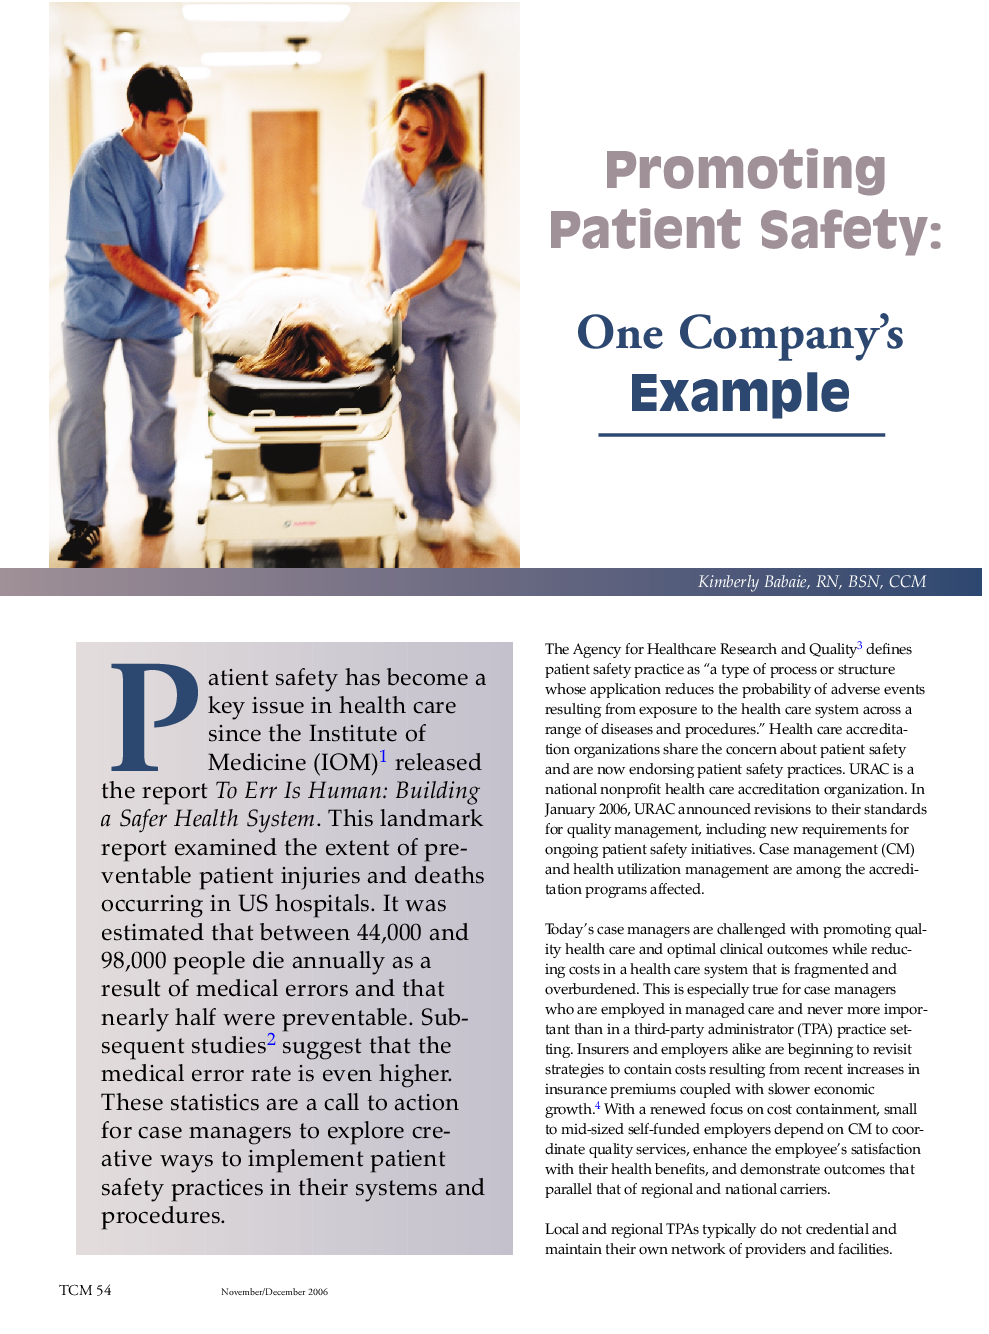 Promoting patient safety: One company's example 